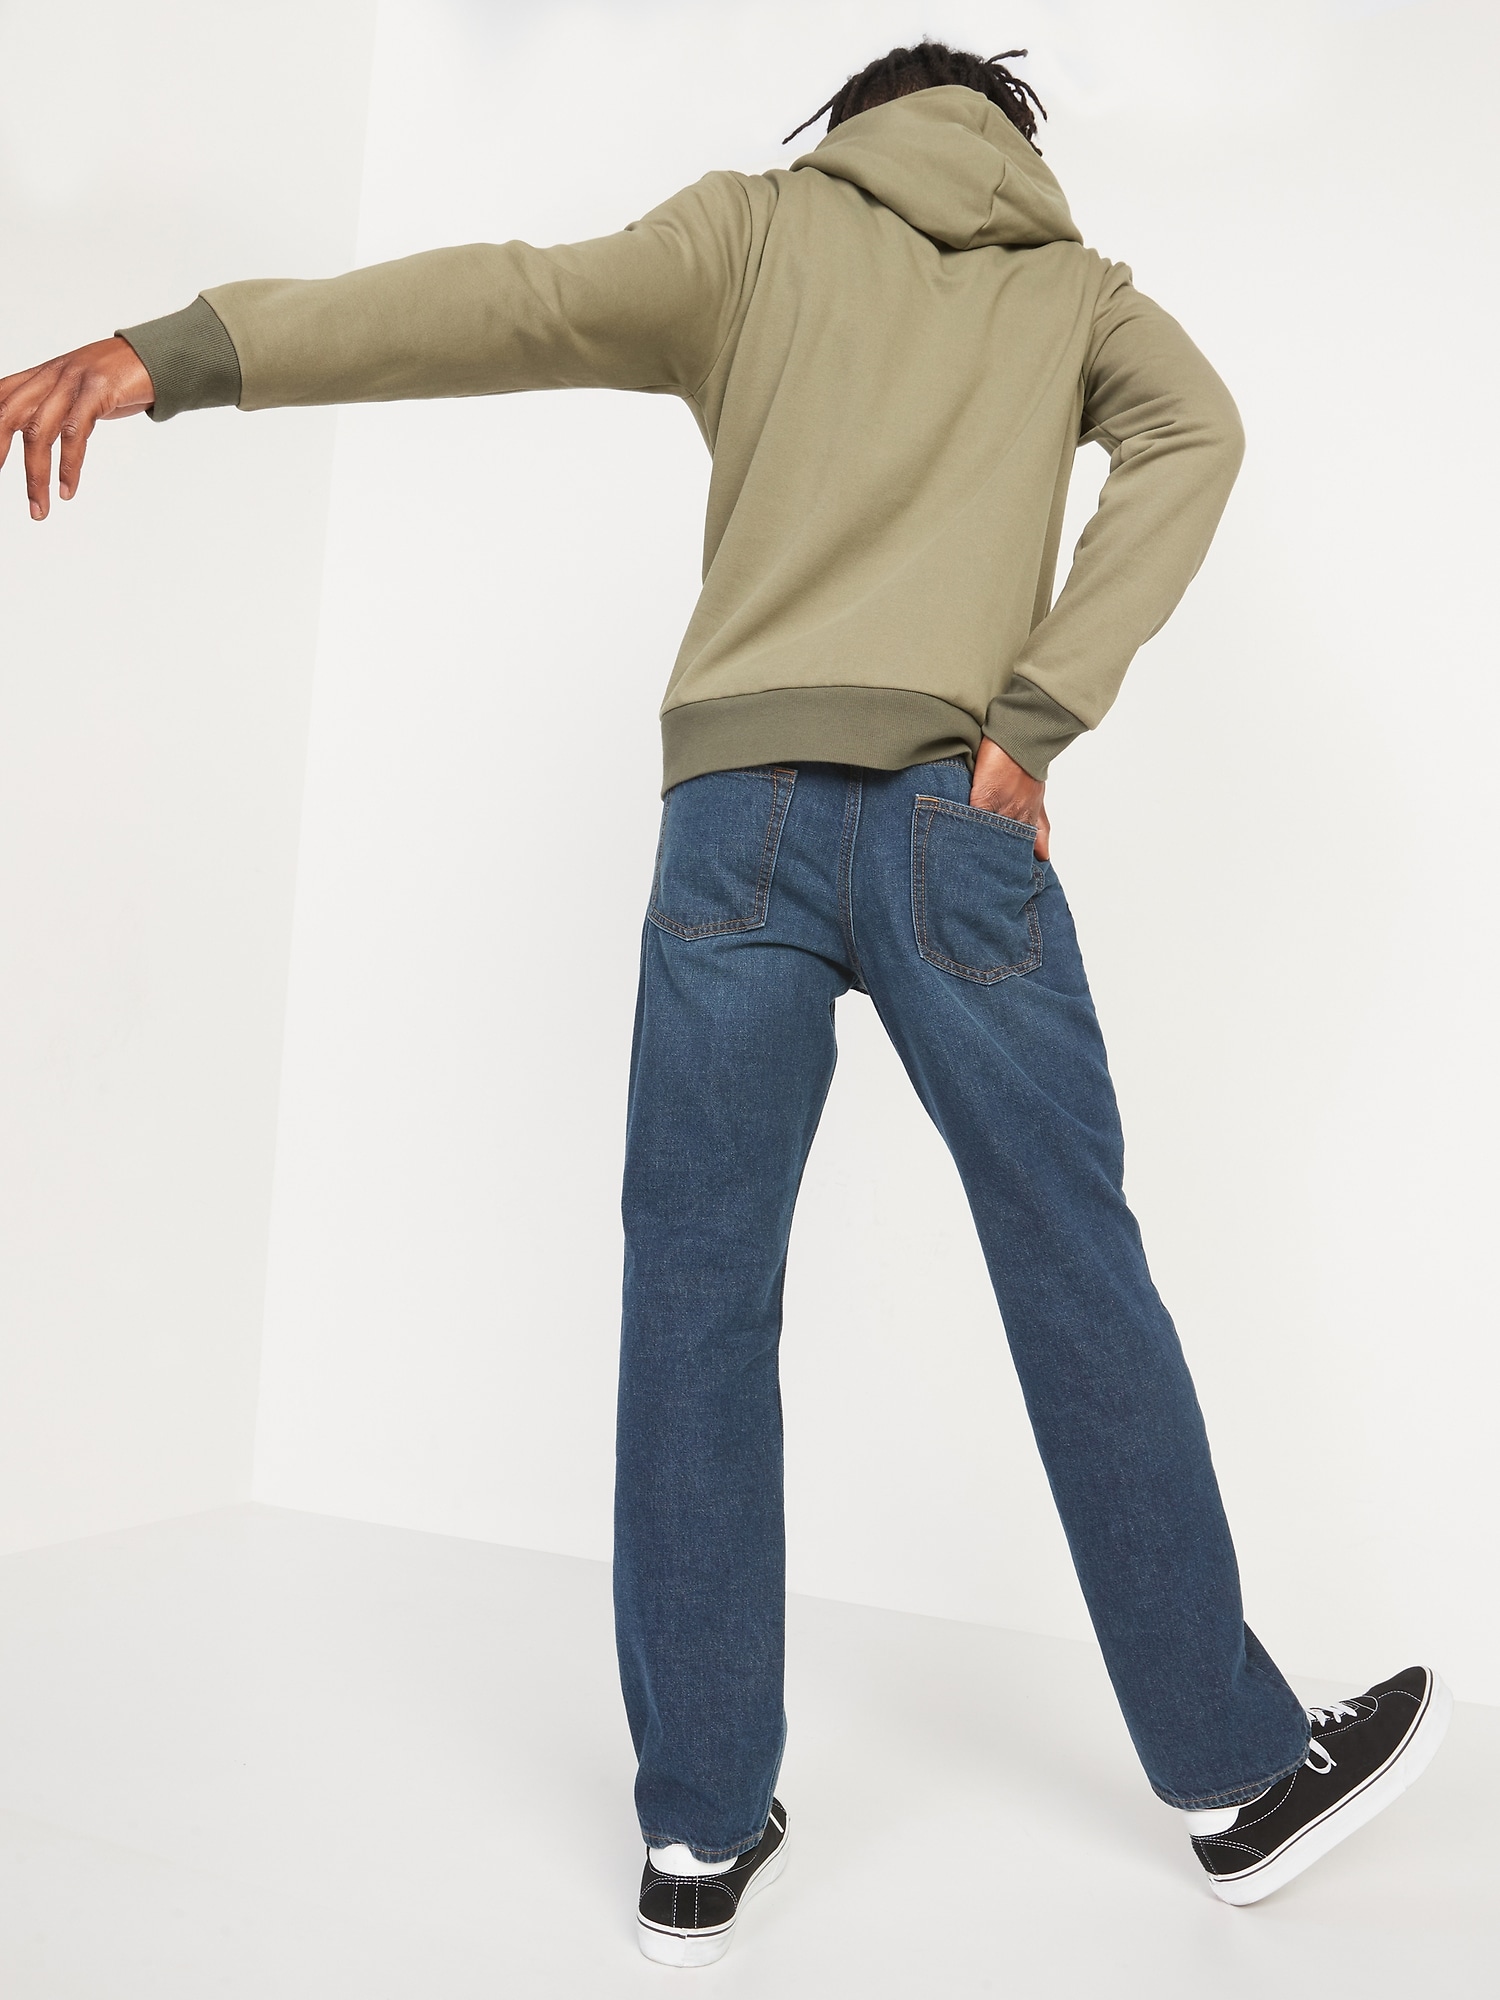 Boot-Cut Cotton Non-Stretch Jeans for Men | Old Navy